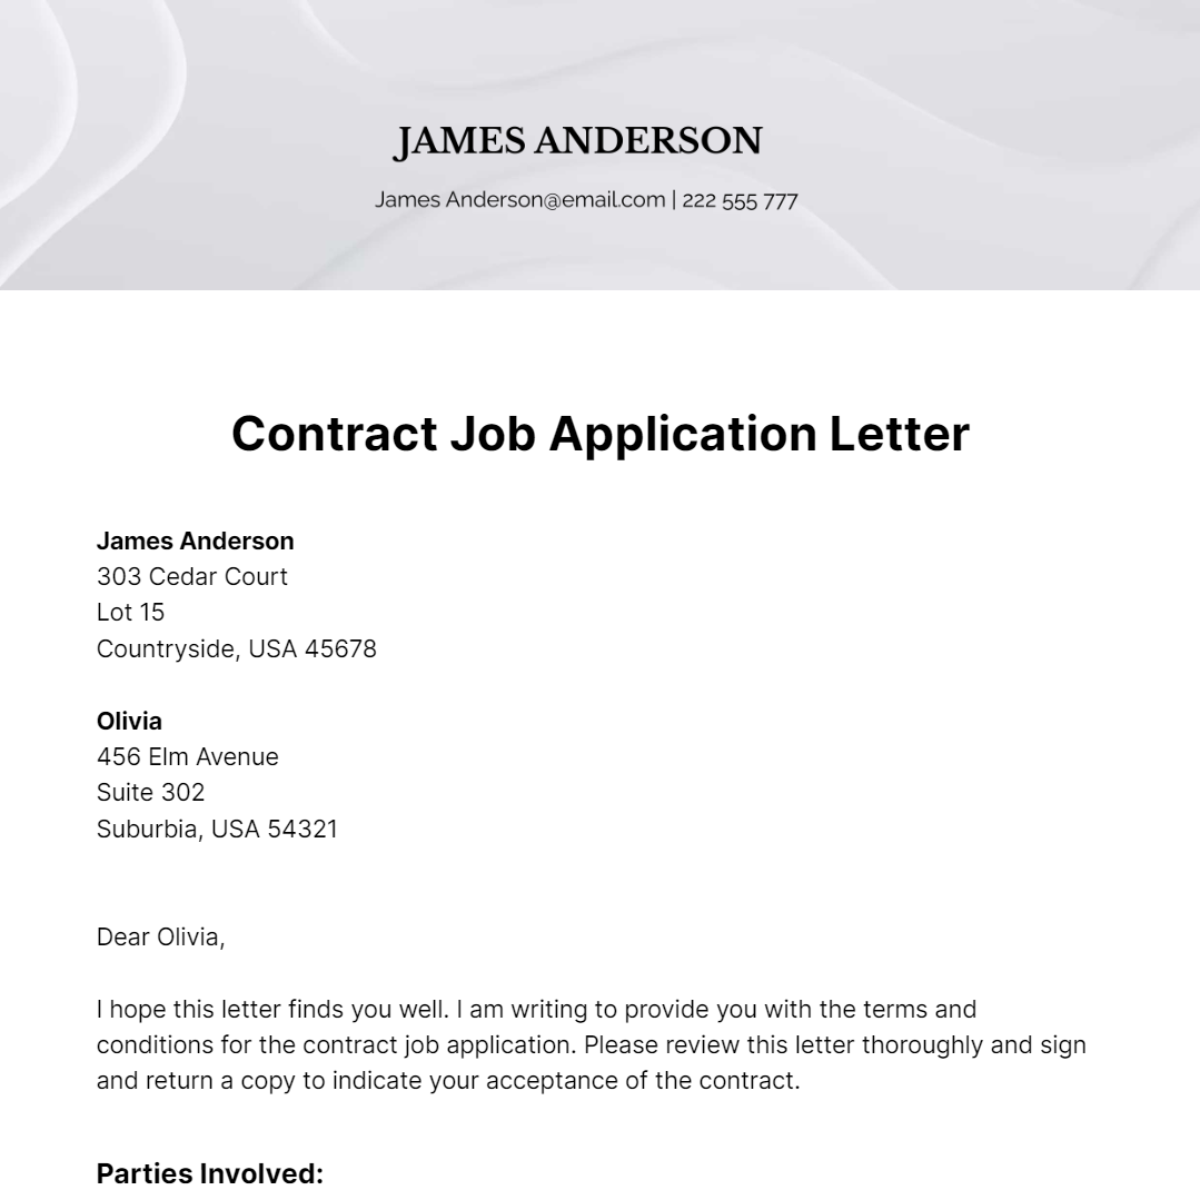 Contract Job Application Letter Template